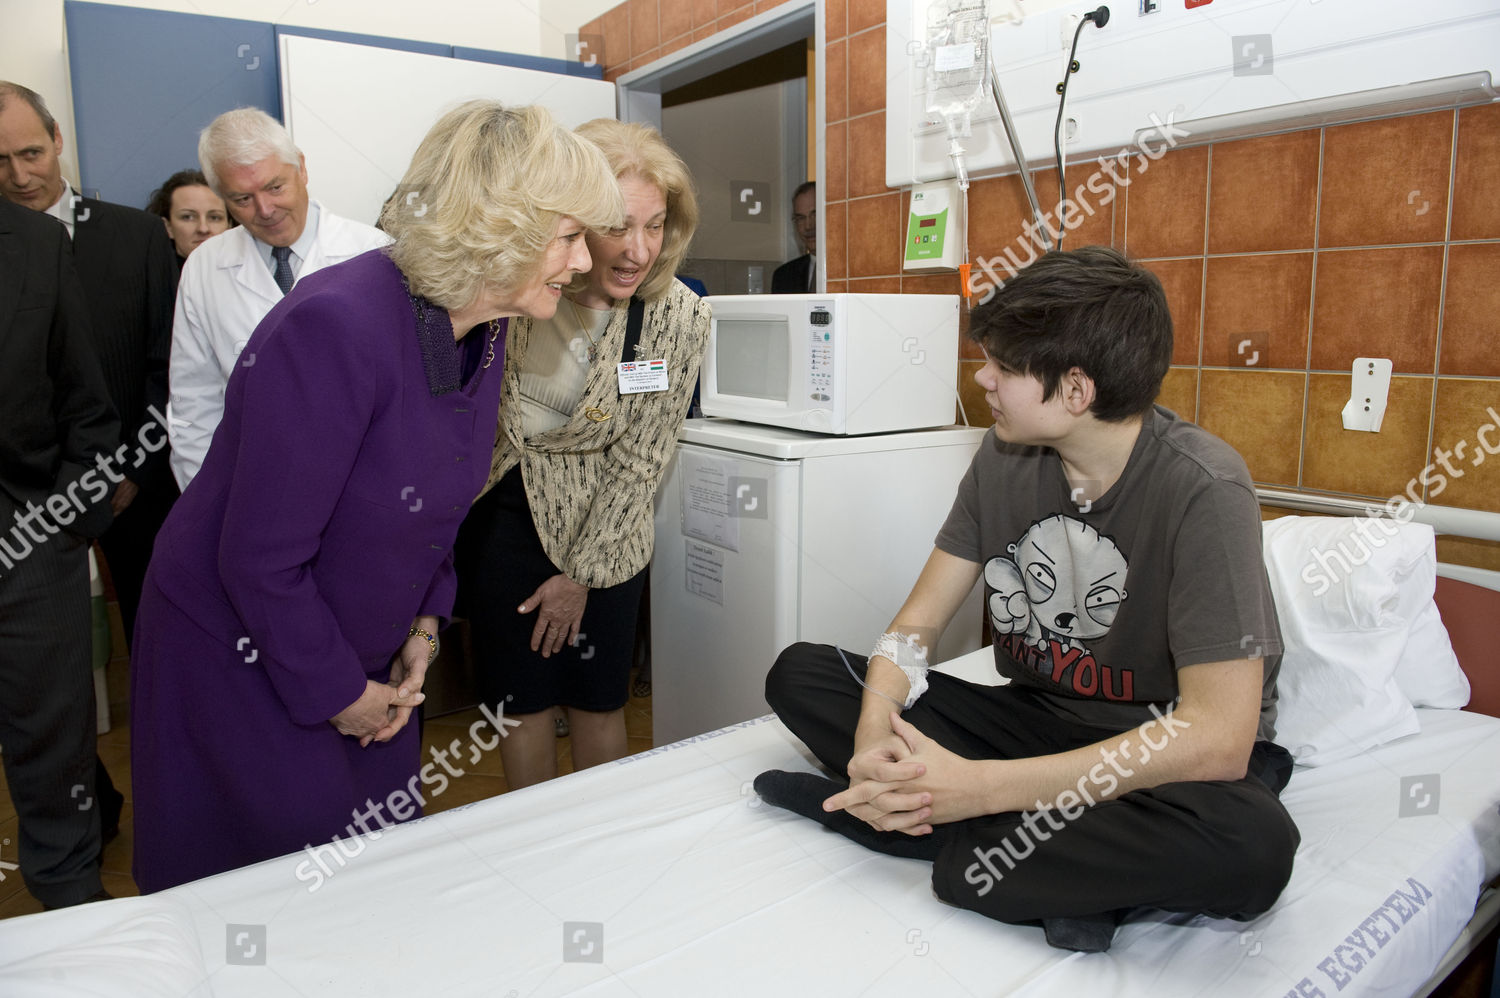 prince-charles-and-camilla-duchess-of-cornwall-official-visit-to-budapest-hungary-shutterstock-editorial-1150905j.jpg